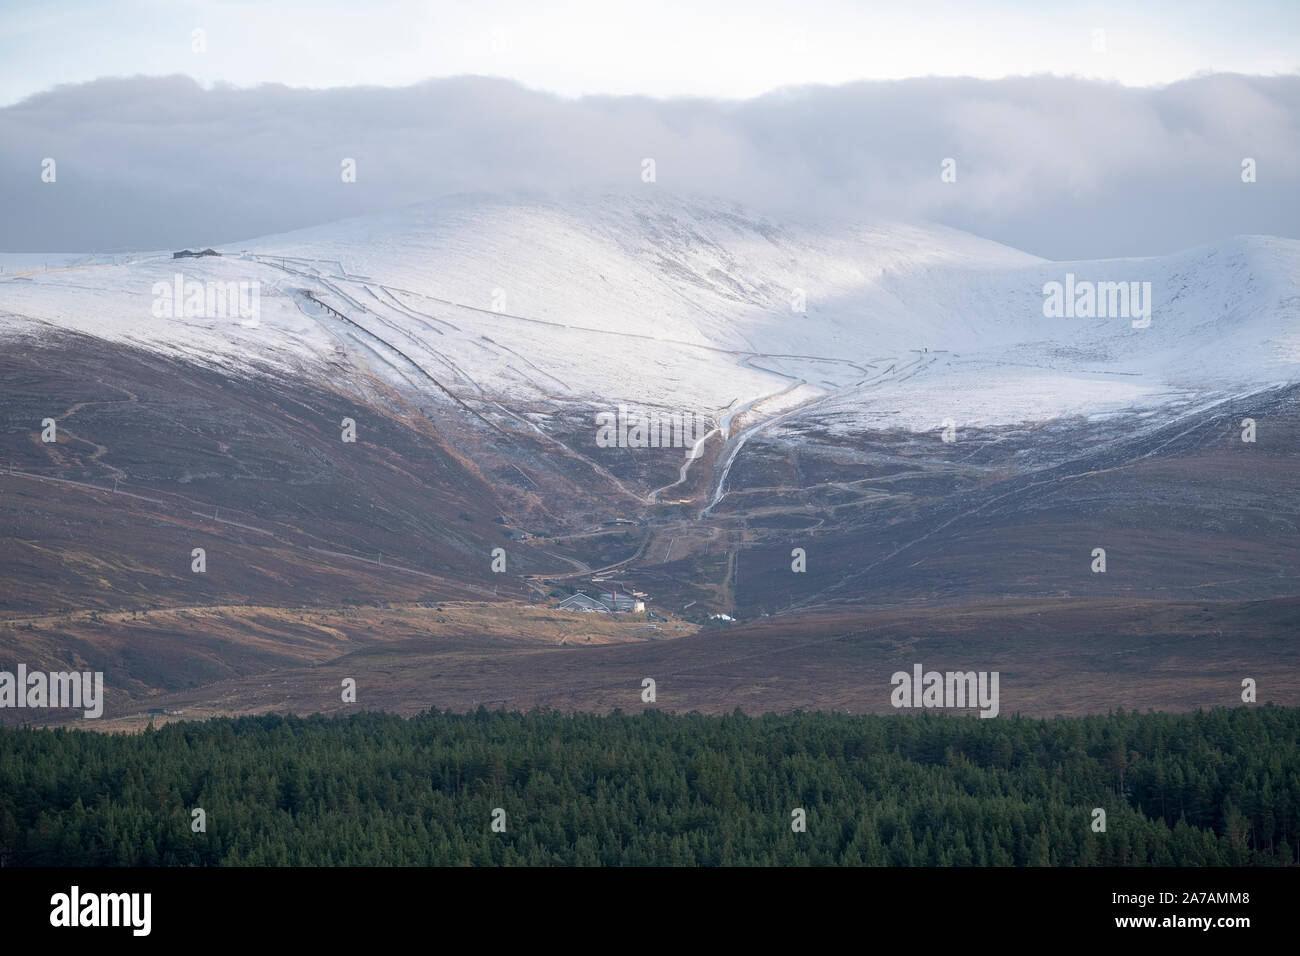 A view from Loch Morlich of the Cairngorm Mountain Ski Centre near Aviemore, Badenoch and Strathspey, Scotland Stock Photo